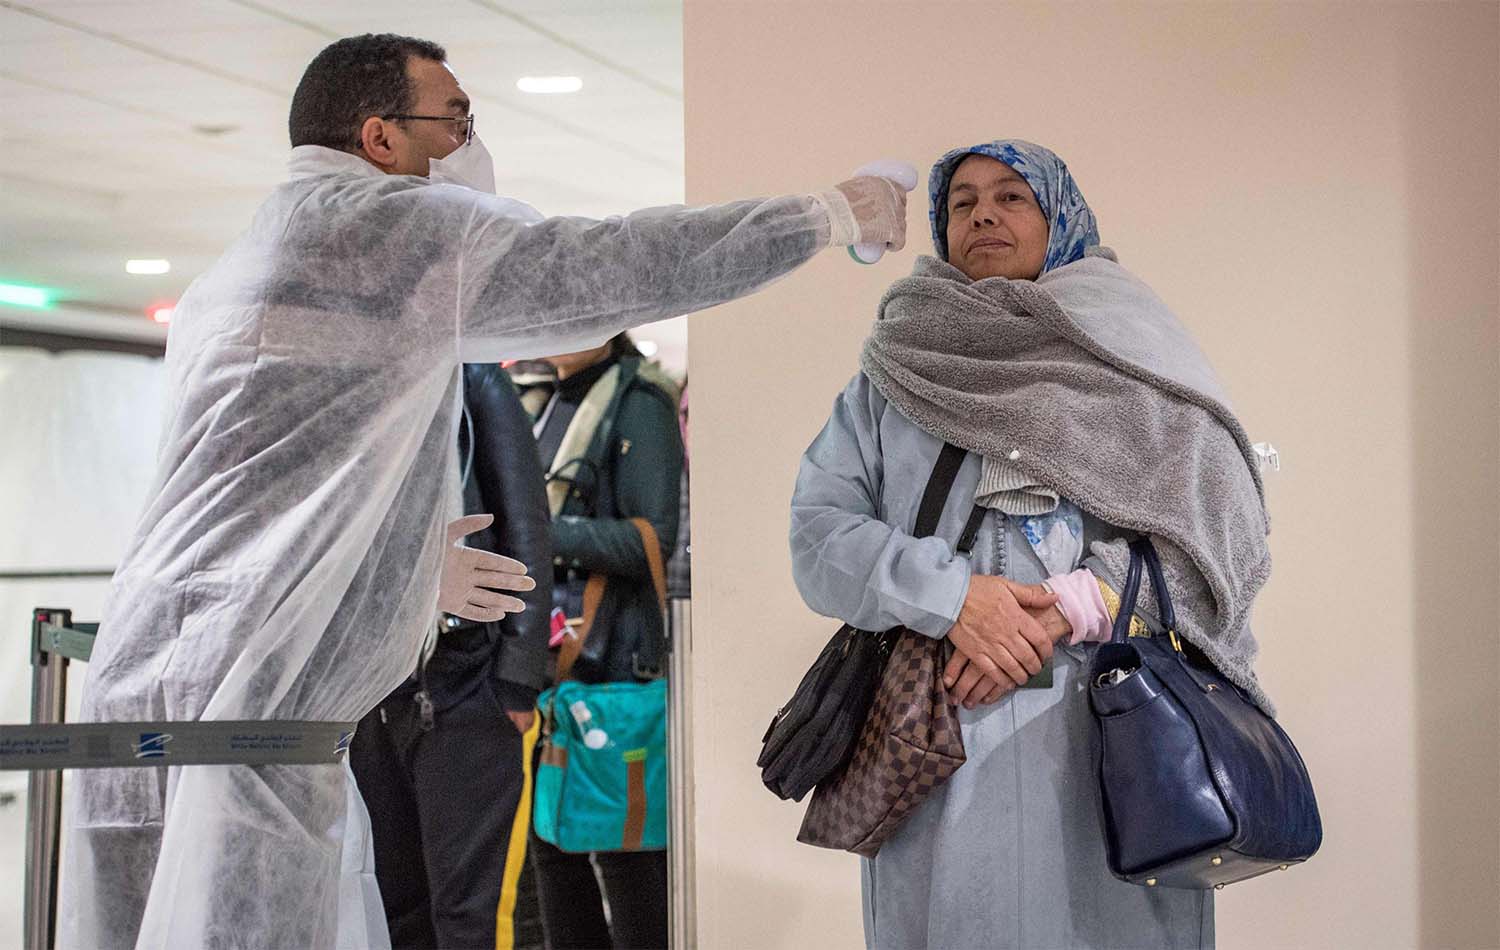 Moroccan health workers scan passengers arriving from Italy for coronavirus COVID-19 at Casablanca Mohammed V International Airport on March 3